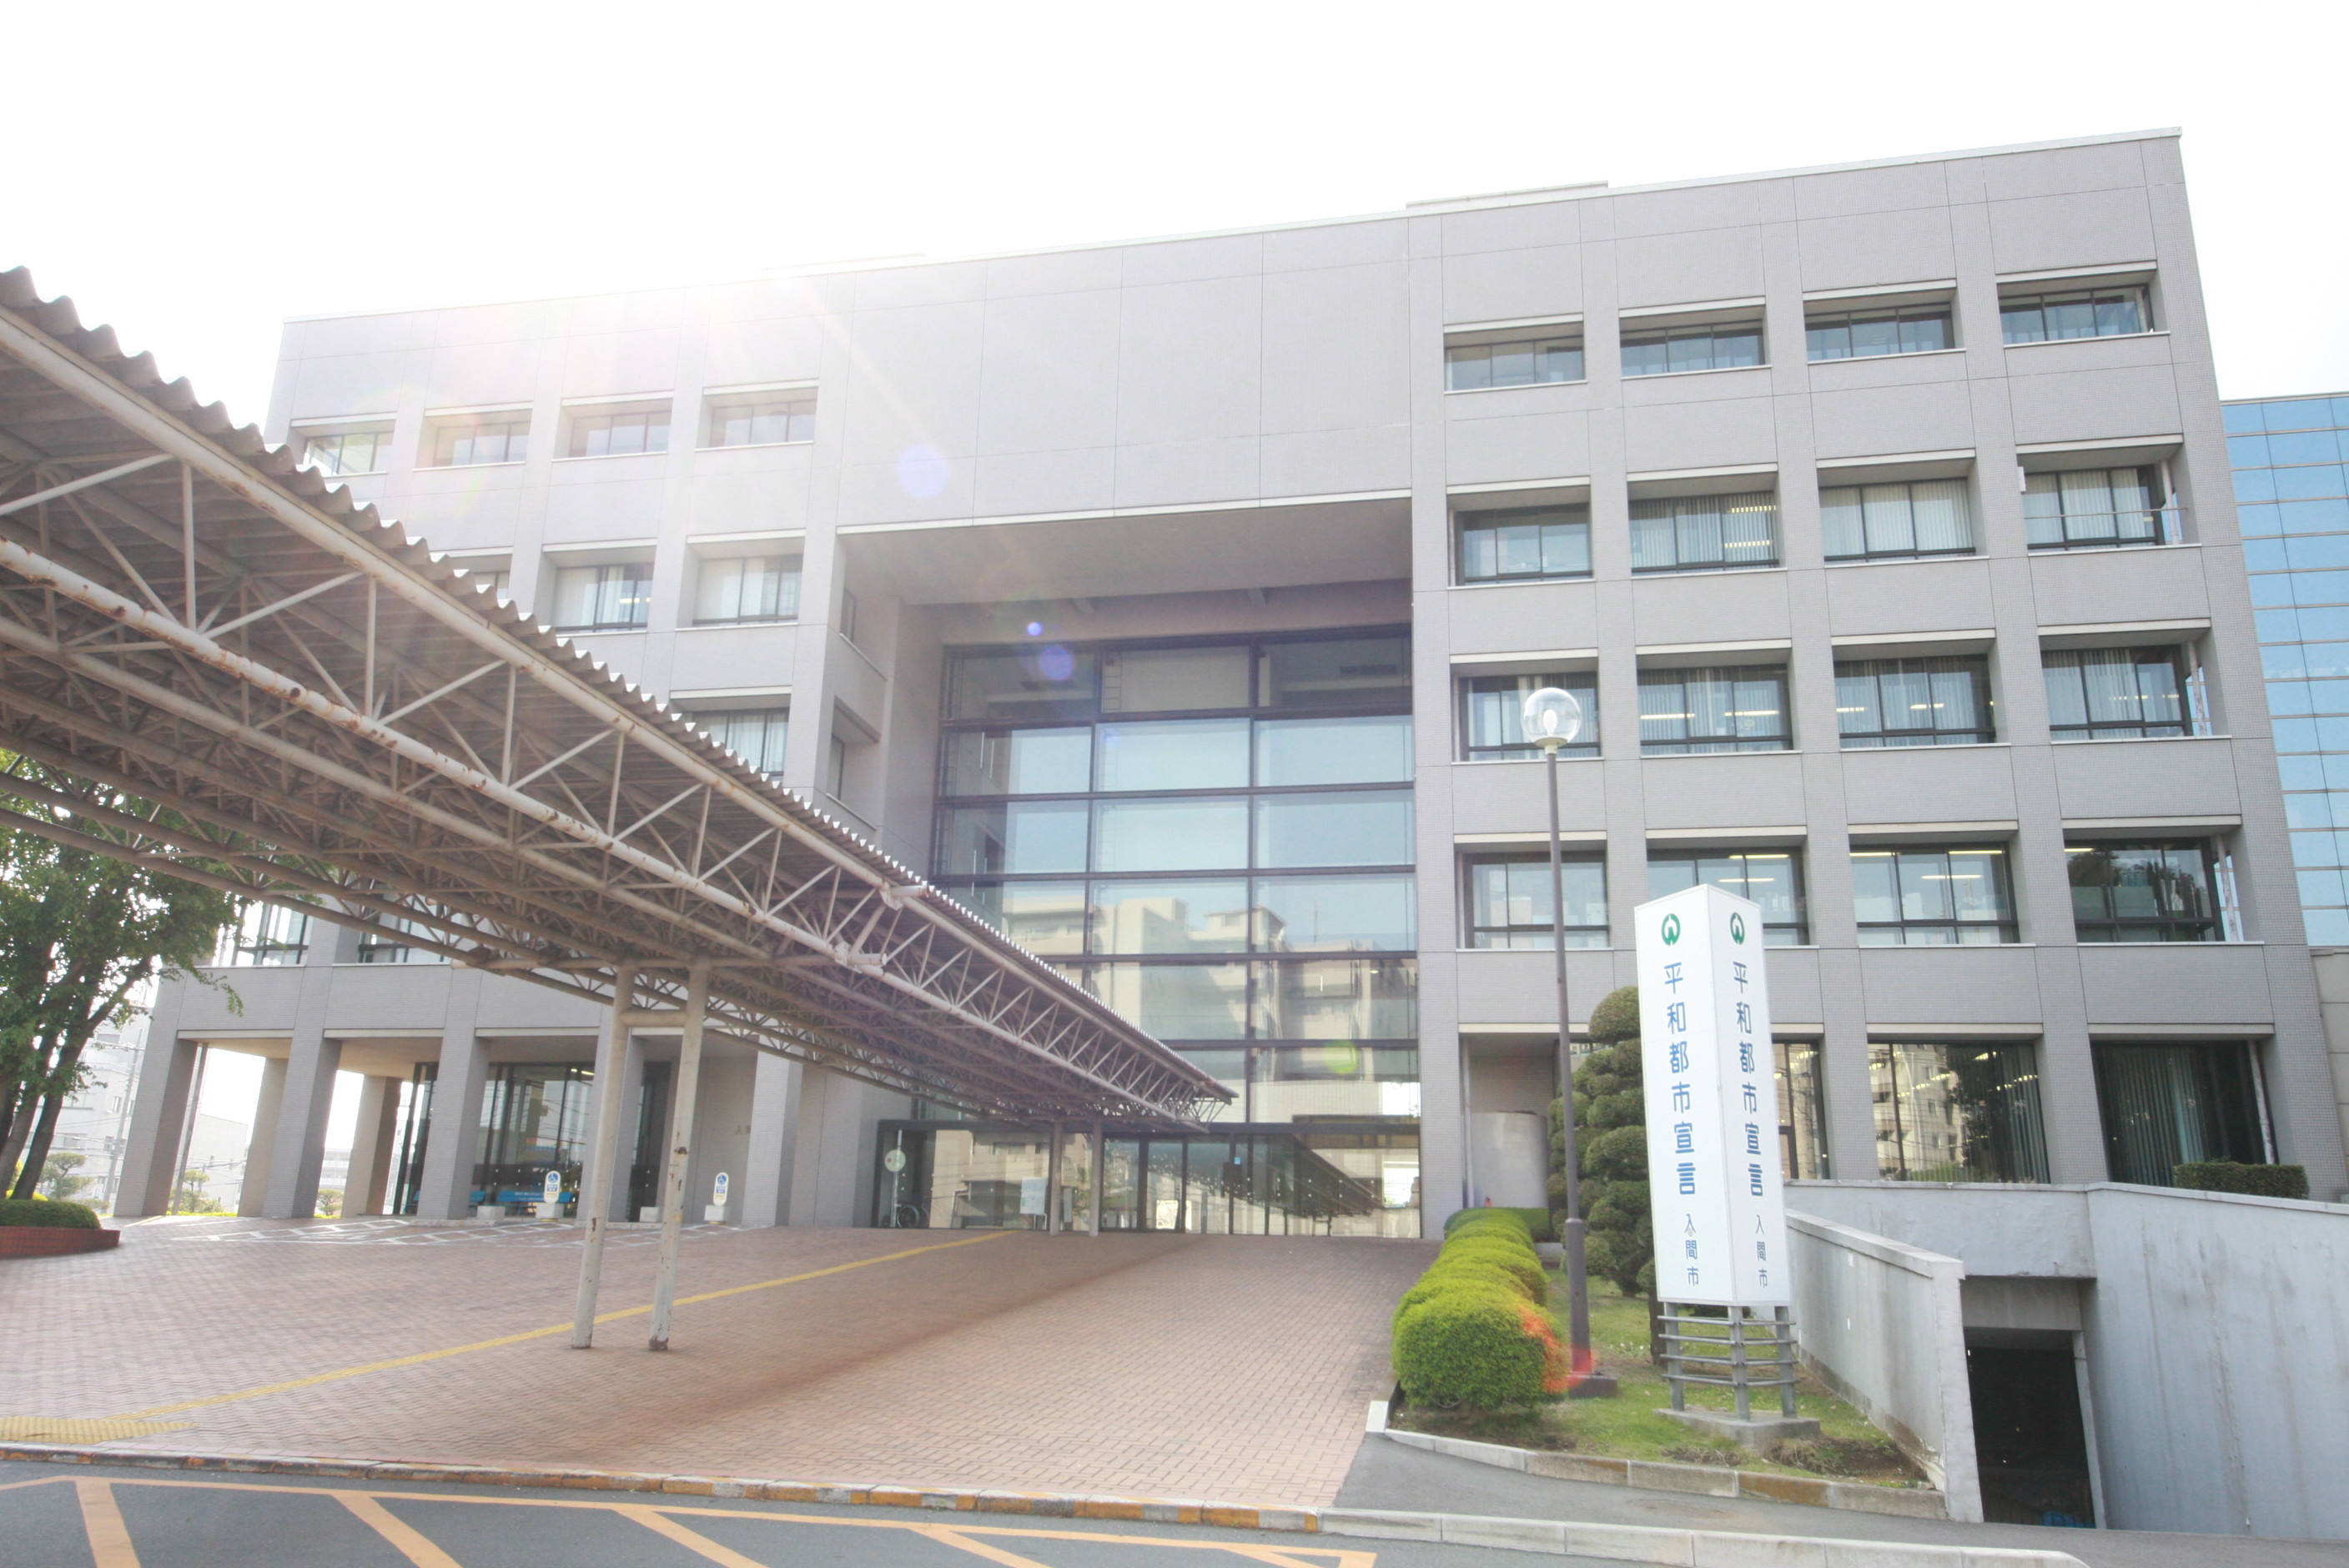 Government office. Iruma 530m to City Hall (government office)